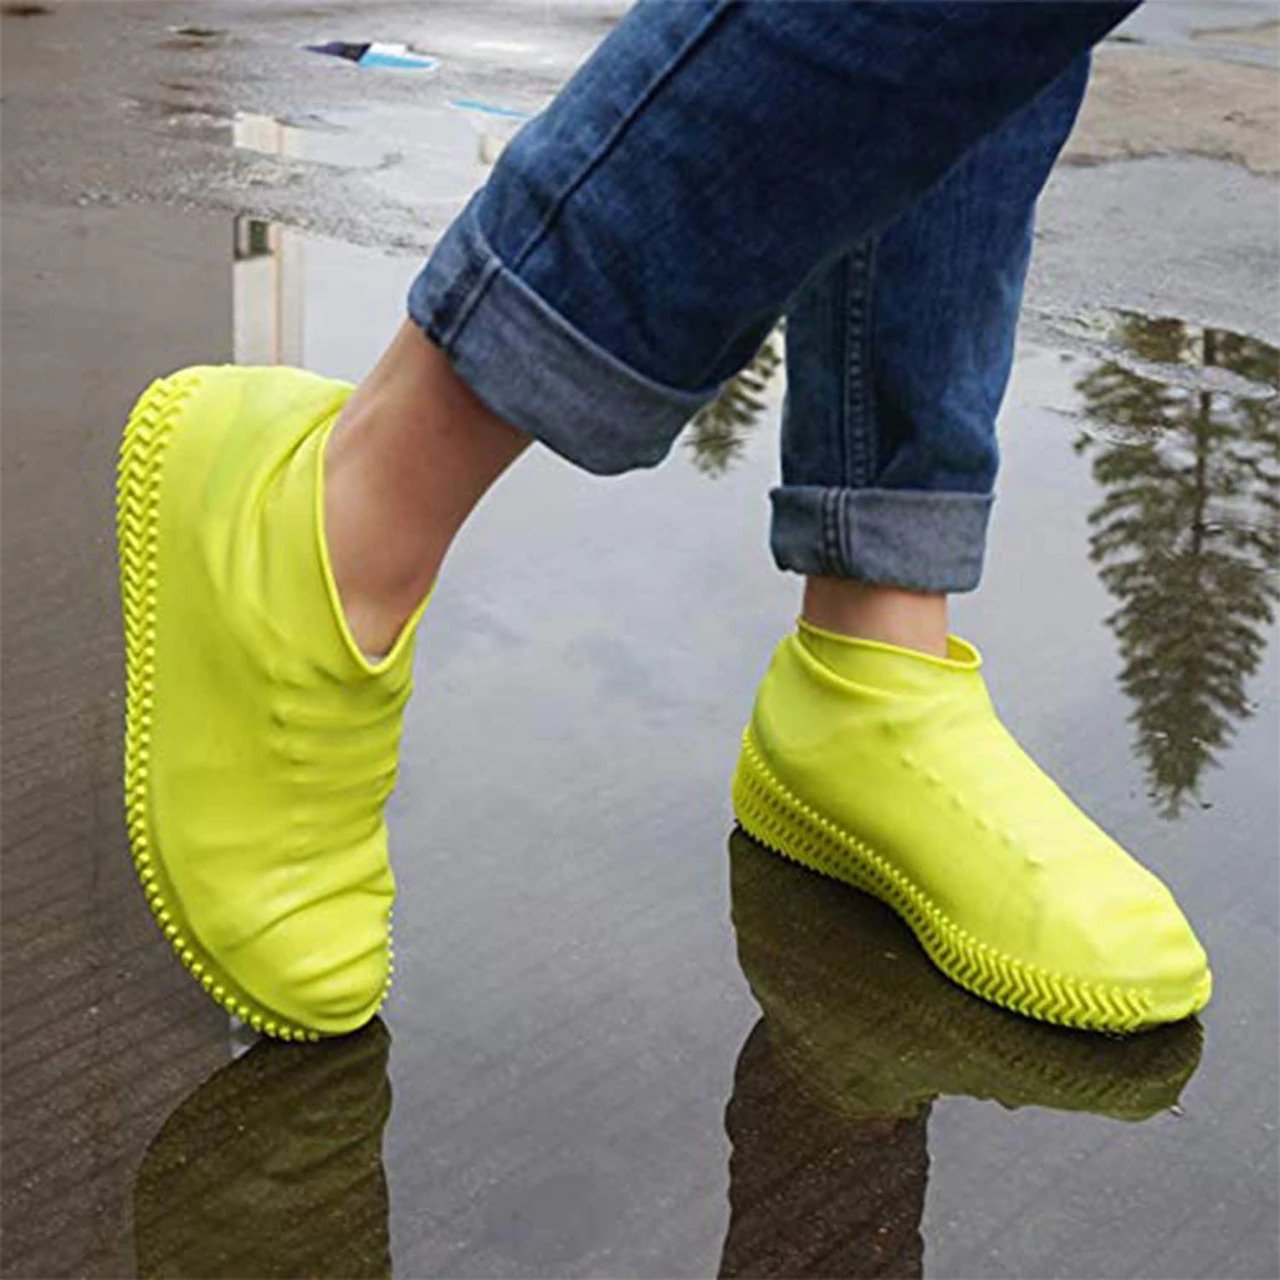 Silicone Waterproof Shoe Cover - GadgetsCay